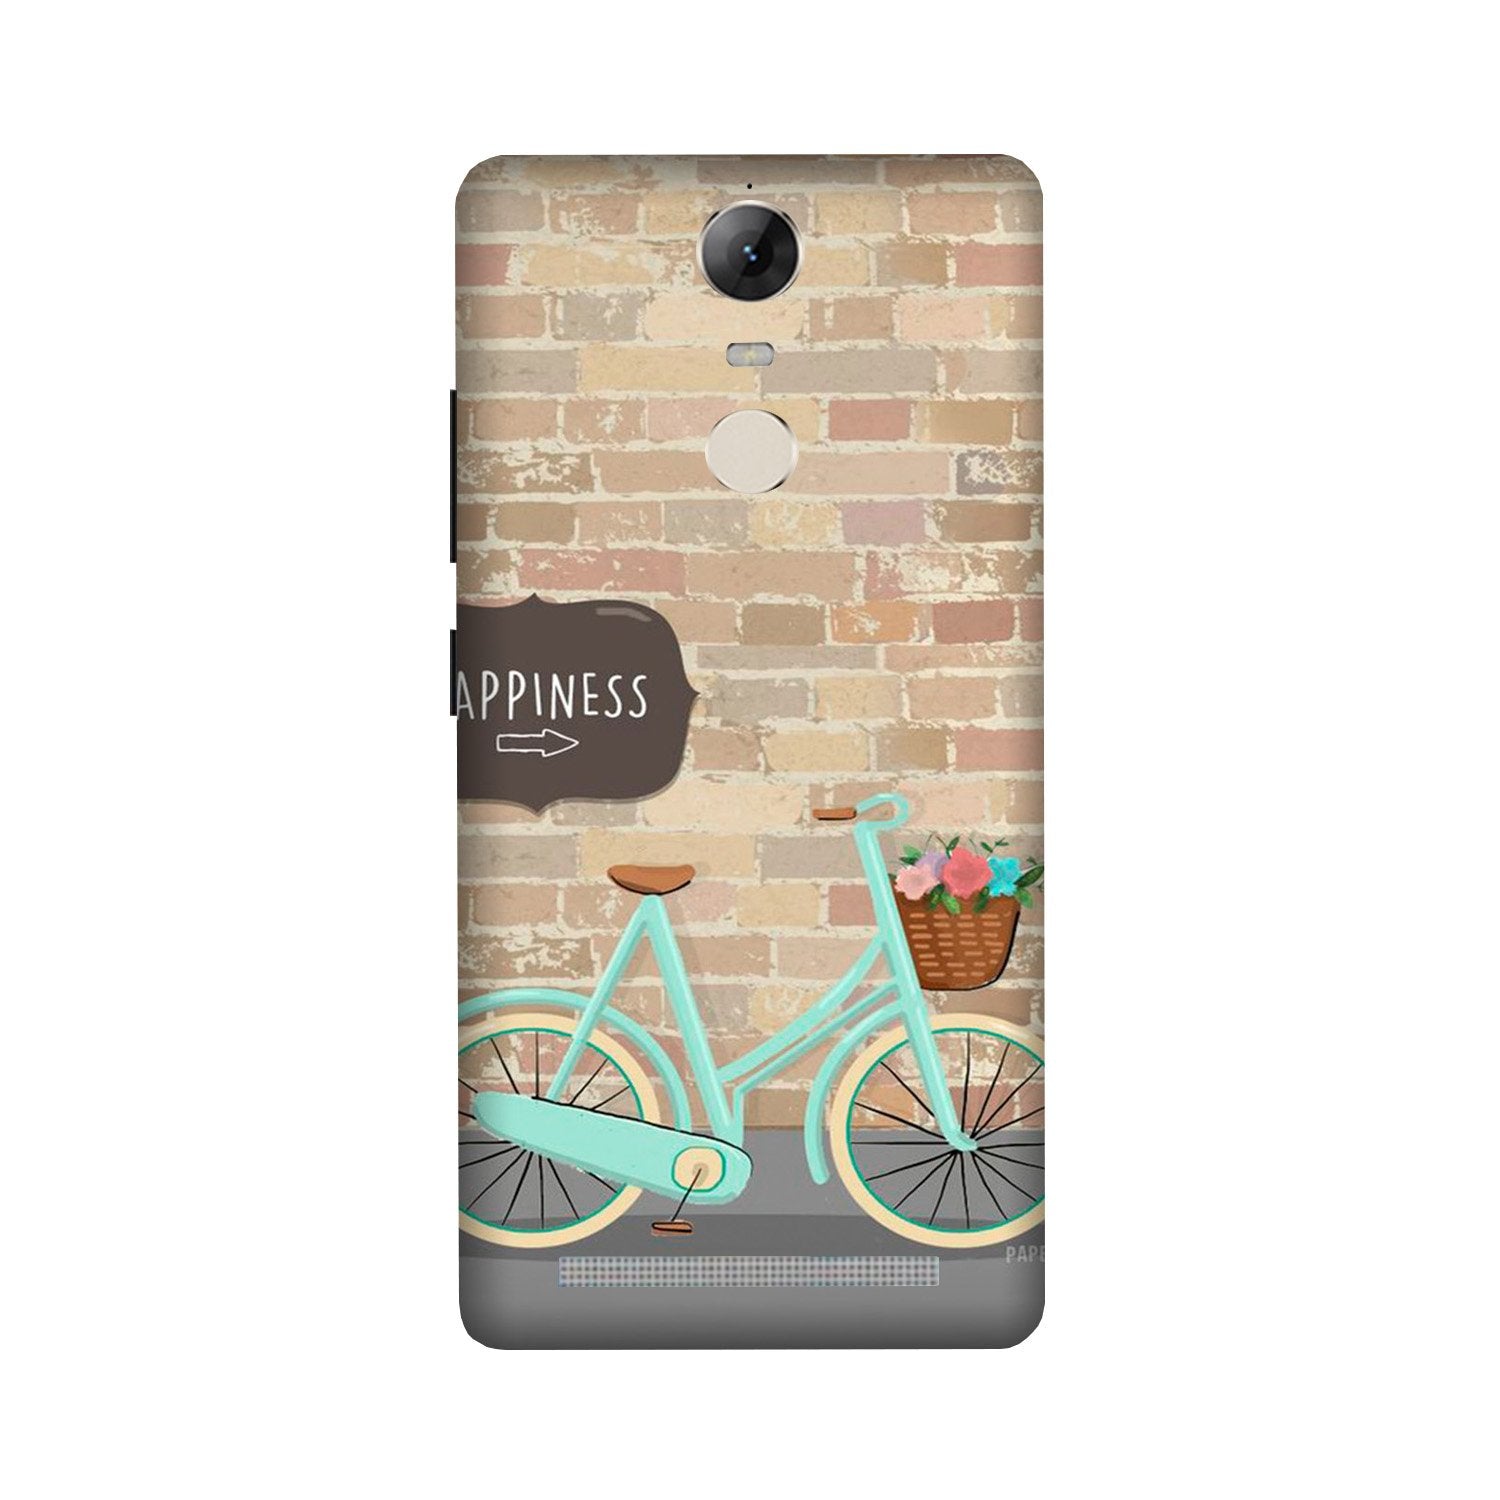 Happiness Case for Lenovo Vibe K5 Note